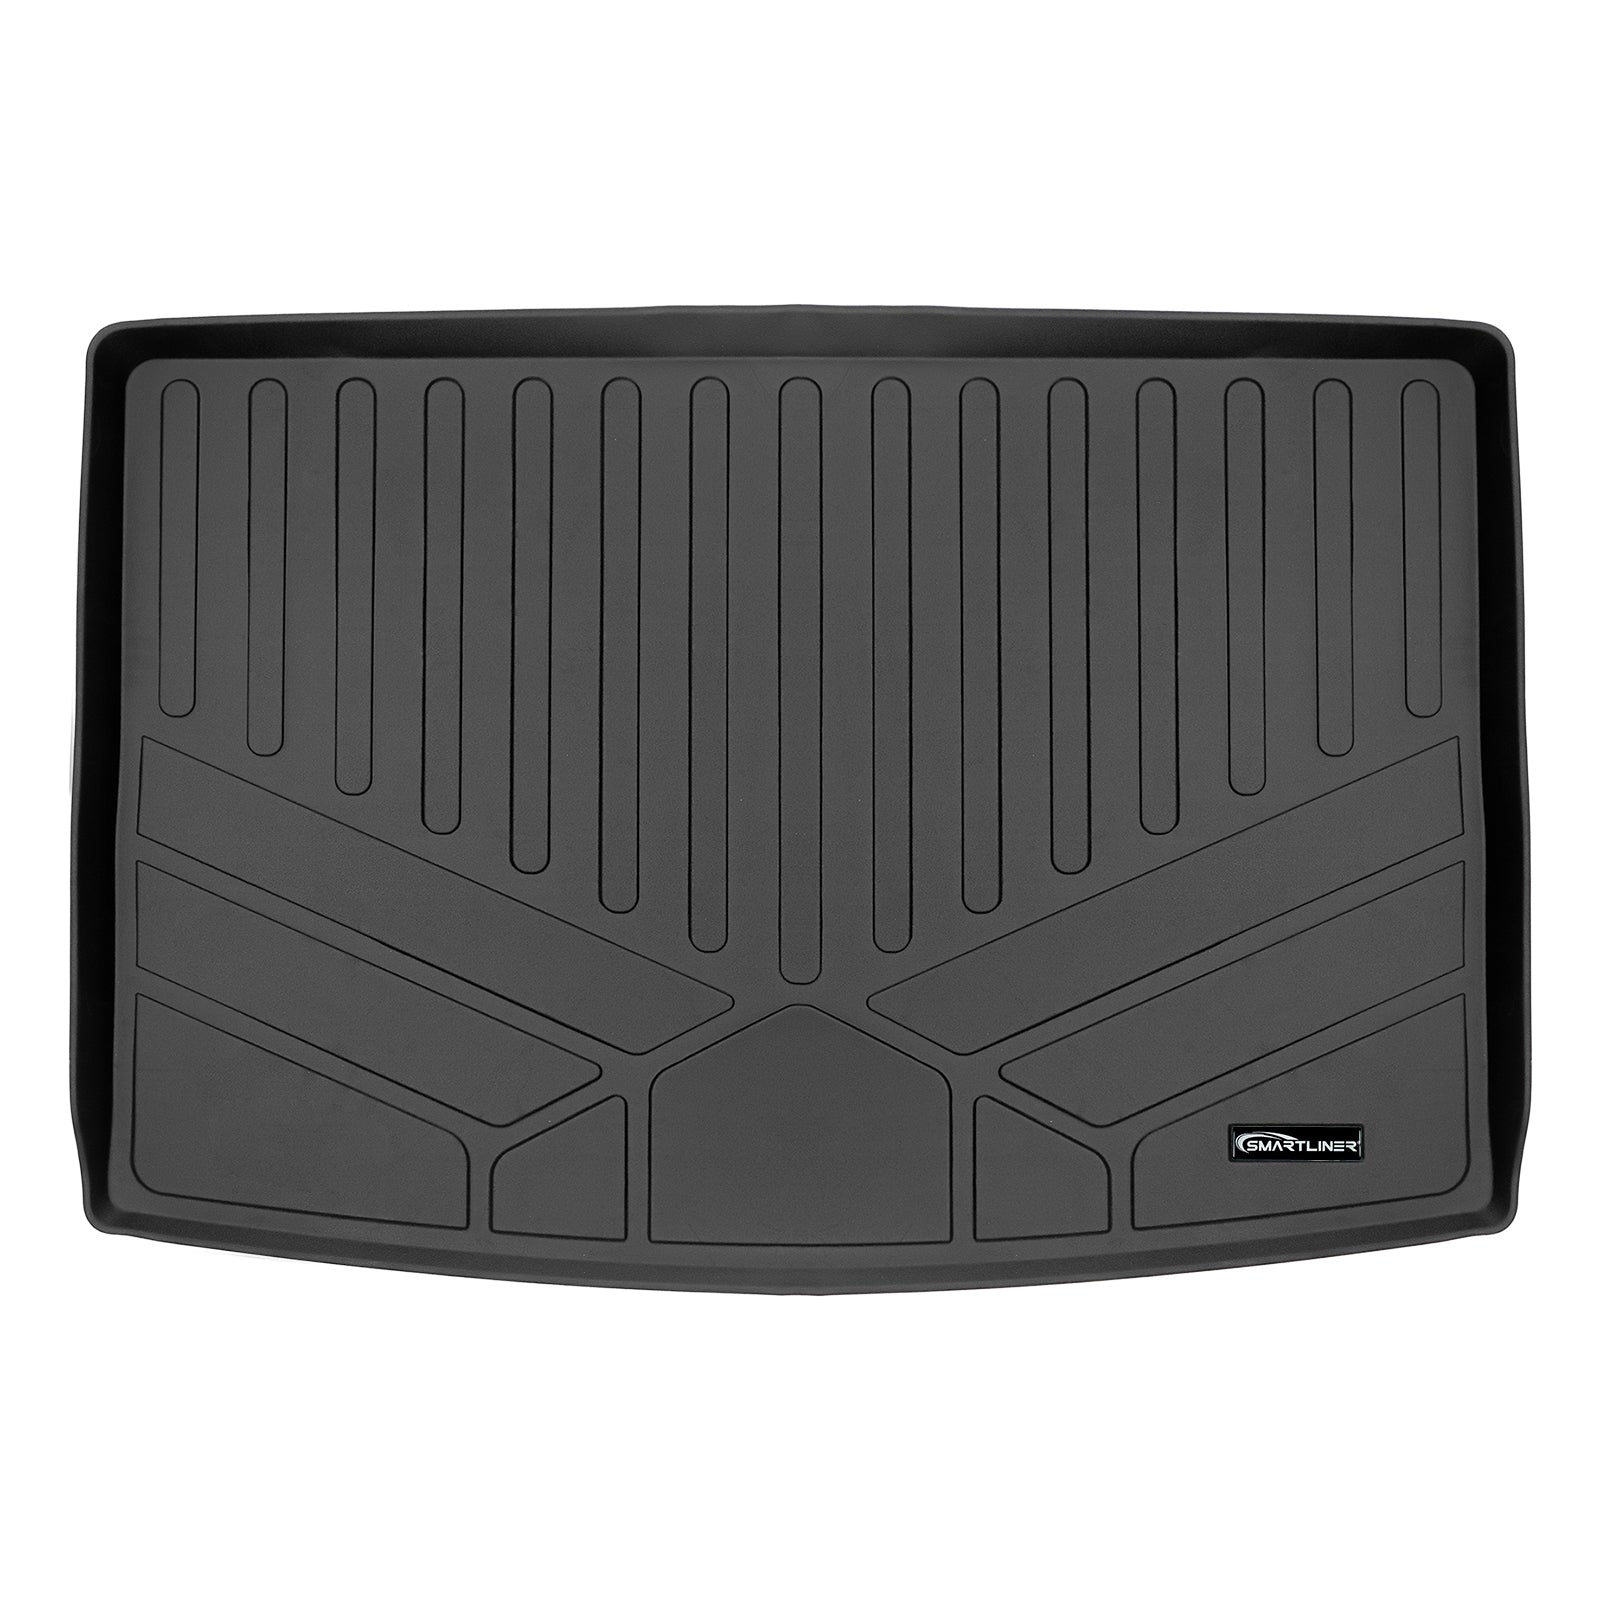 SMARTLINER Custom Fit Floor Liners For 2021-2023 Cadillac Escalade ESV with 2nd Row Bench Seat